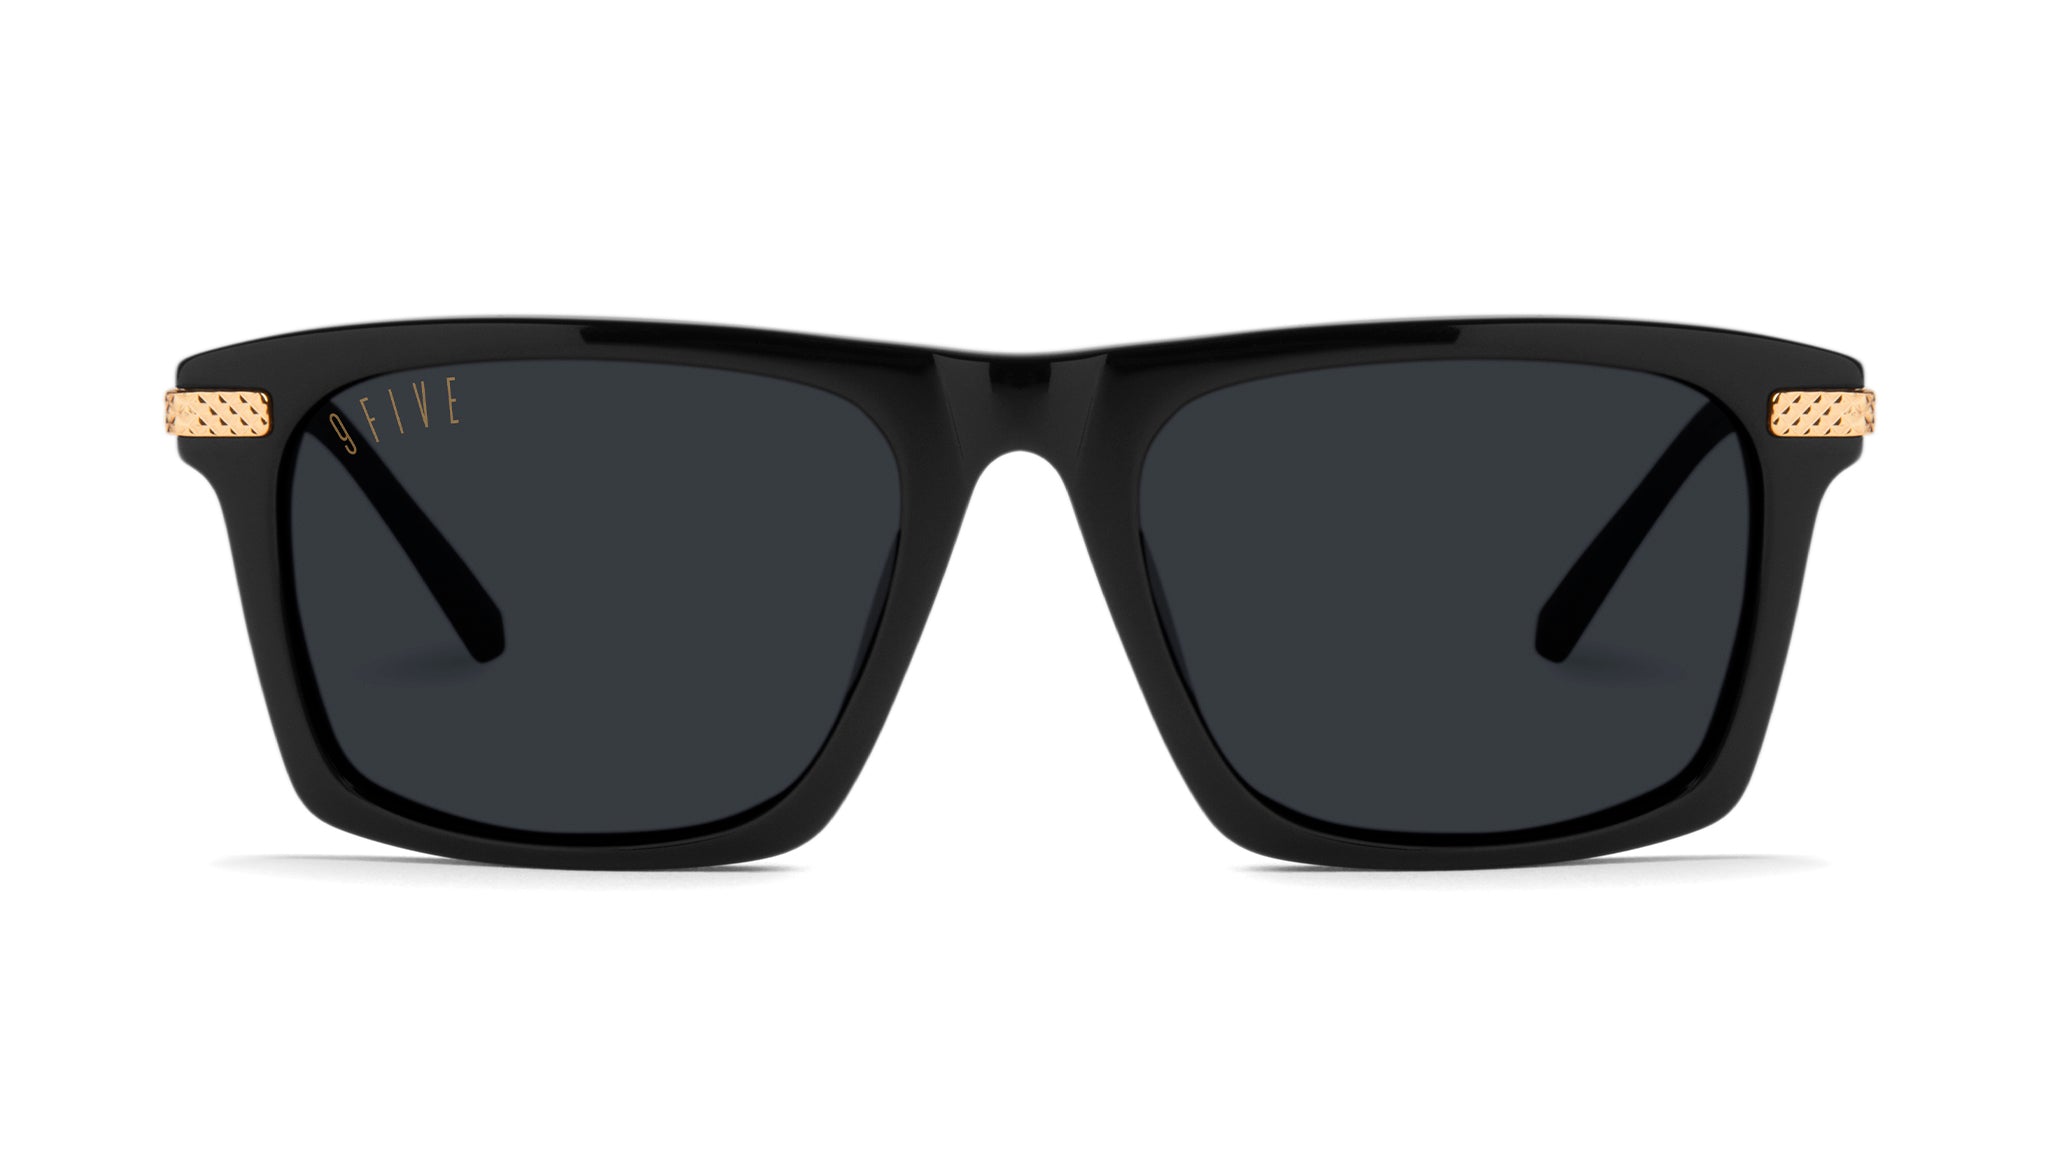 GRIZZLY NEW WAVE SUNGLASSES BLK/WHT